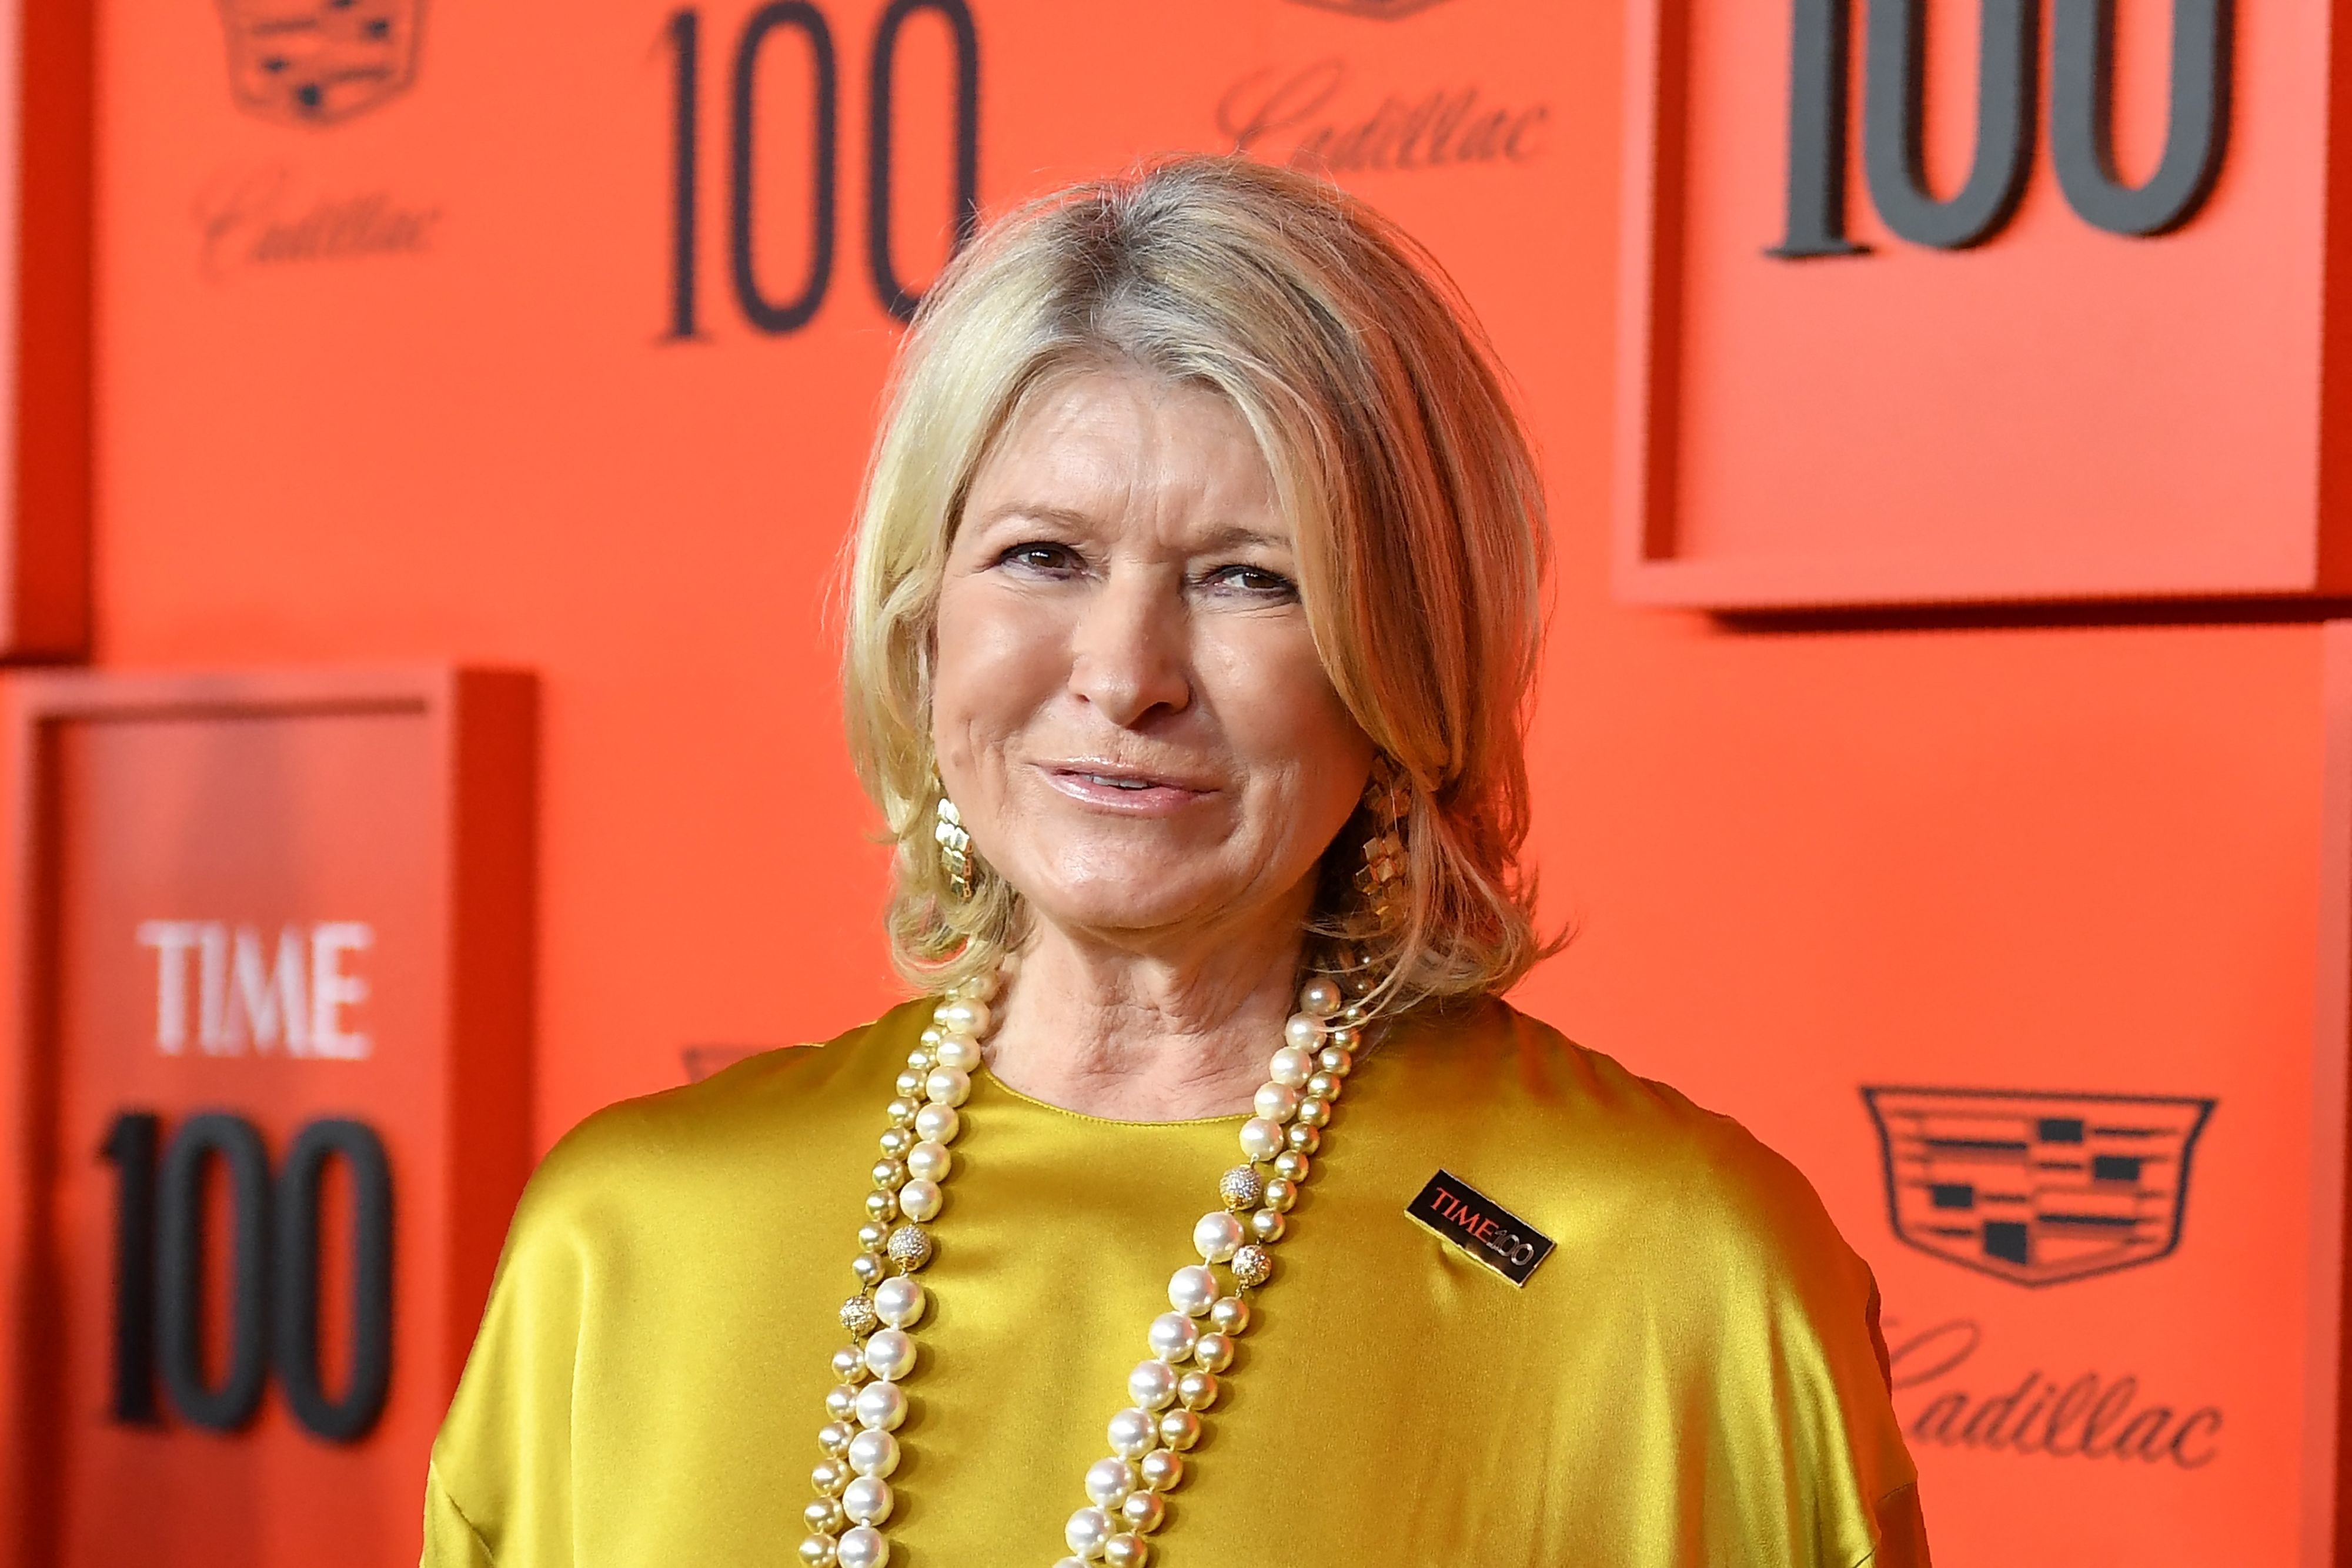 Martha Stewart on the red carpet at the TIME 100 event, wearing a stylish dress with a long string of pearls